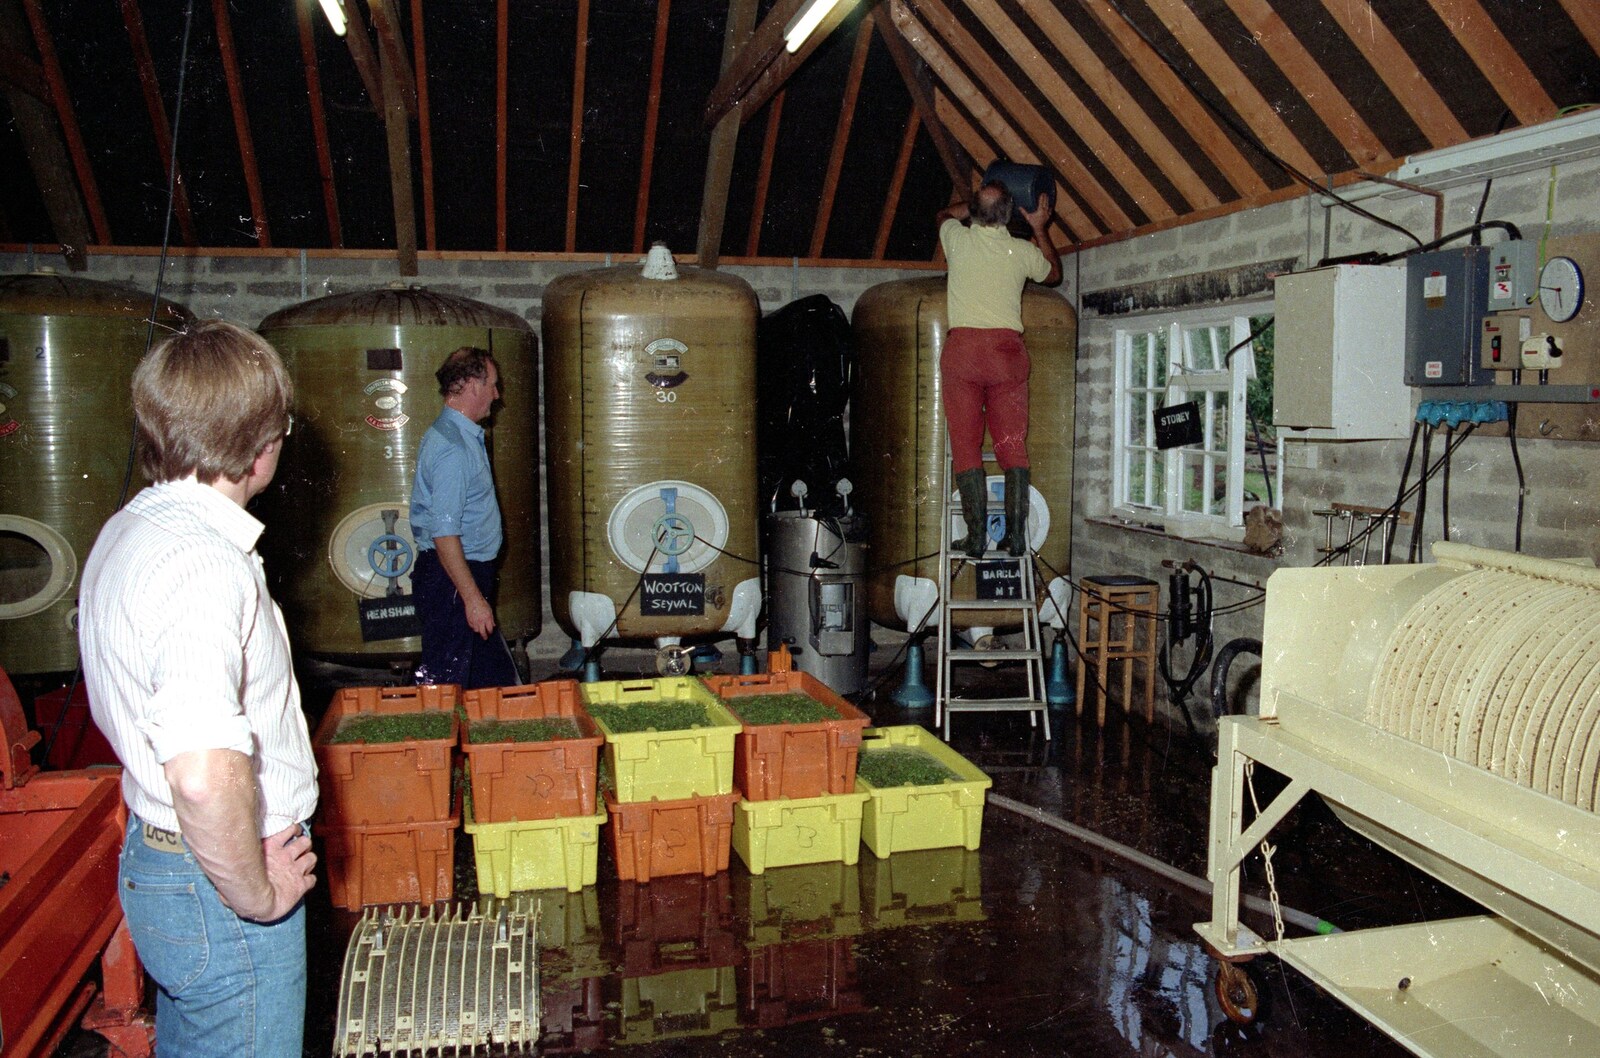 The Major pours something into a tank from Harrow Vineyard Harvest and Wootton Winery, Dorset and Somerset - 5th September 1989